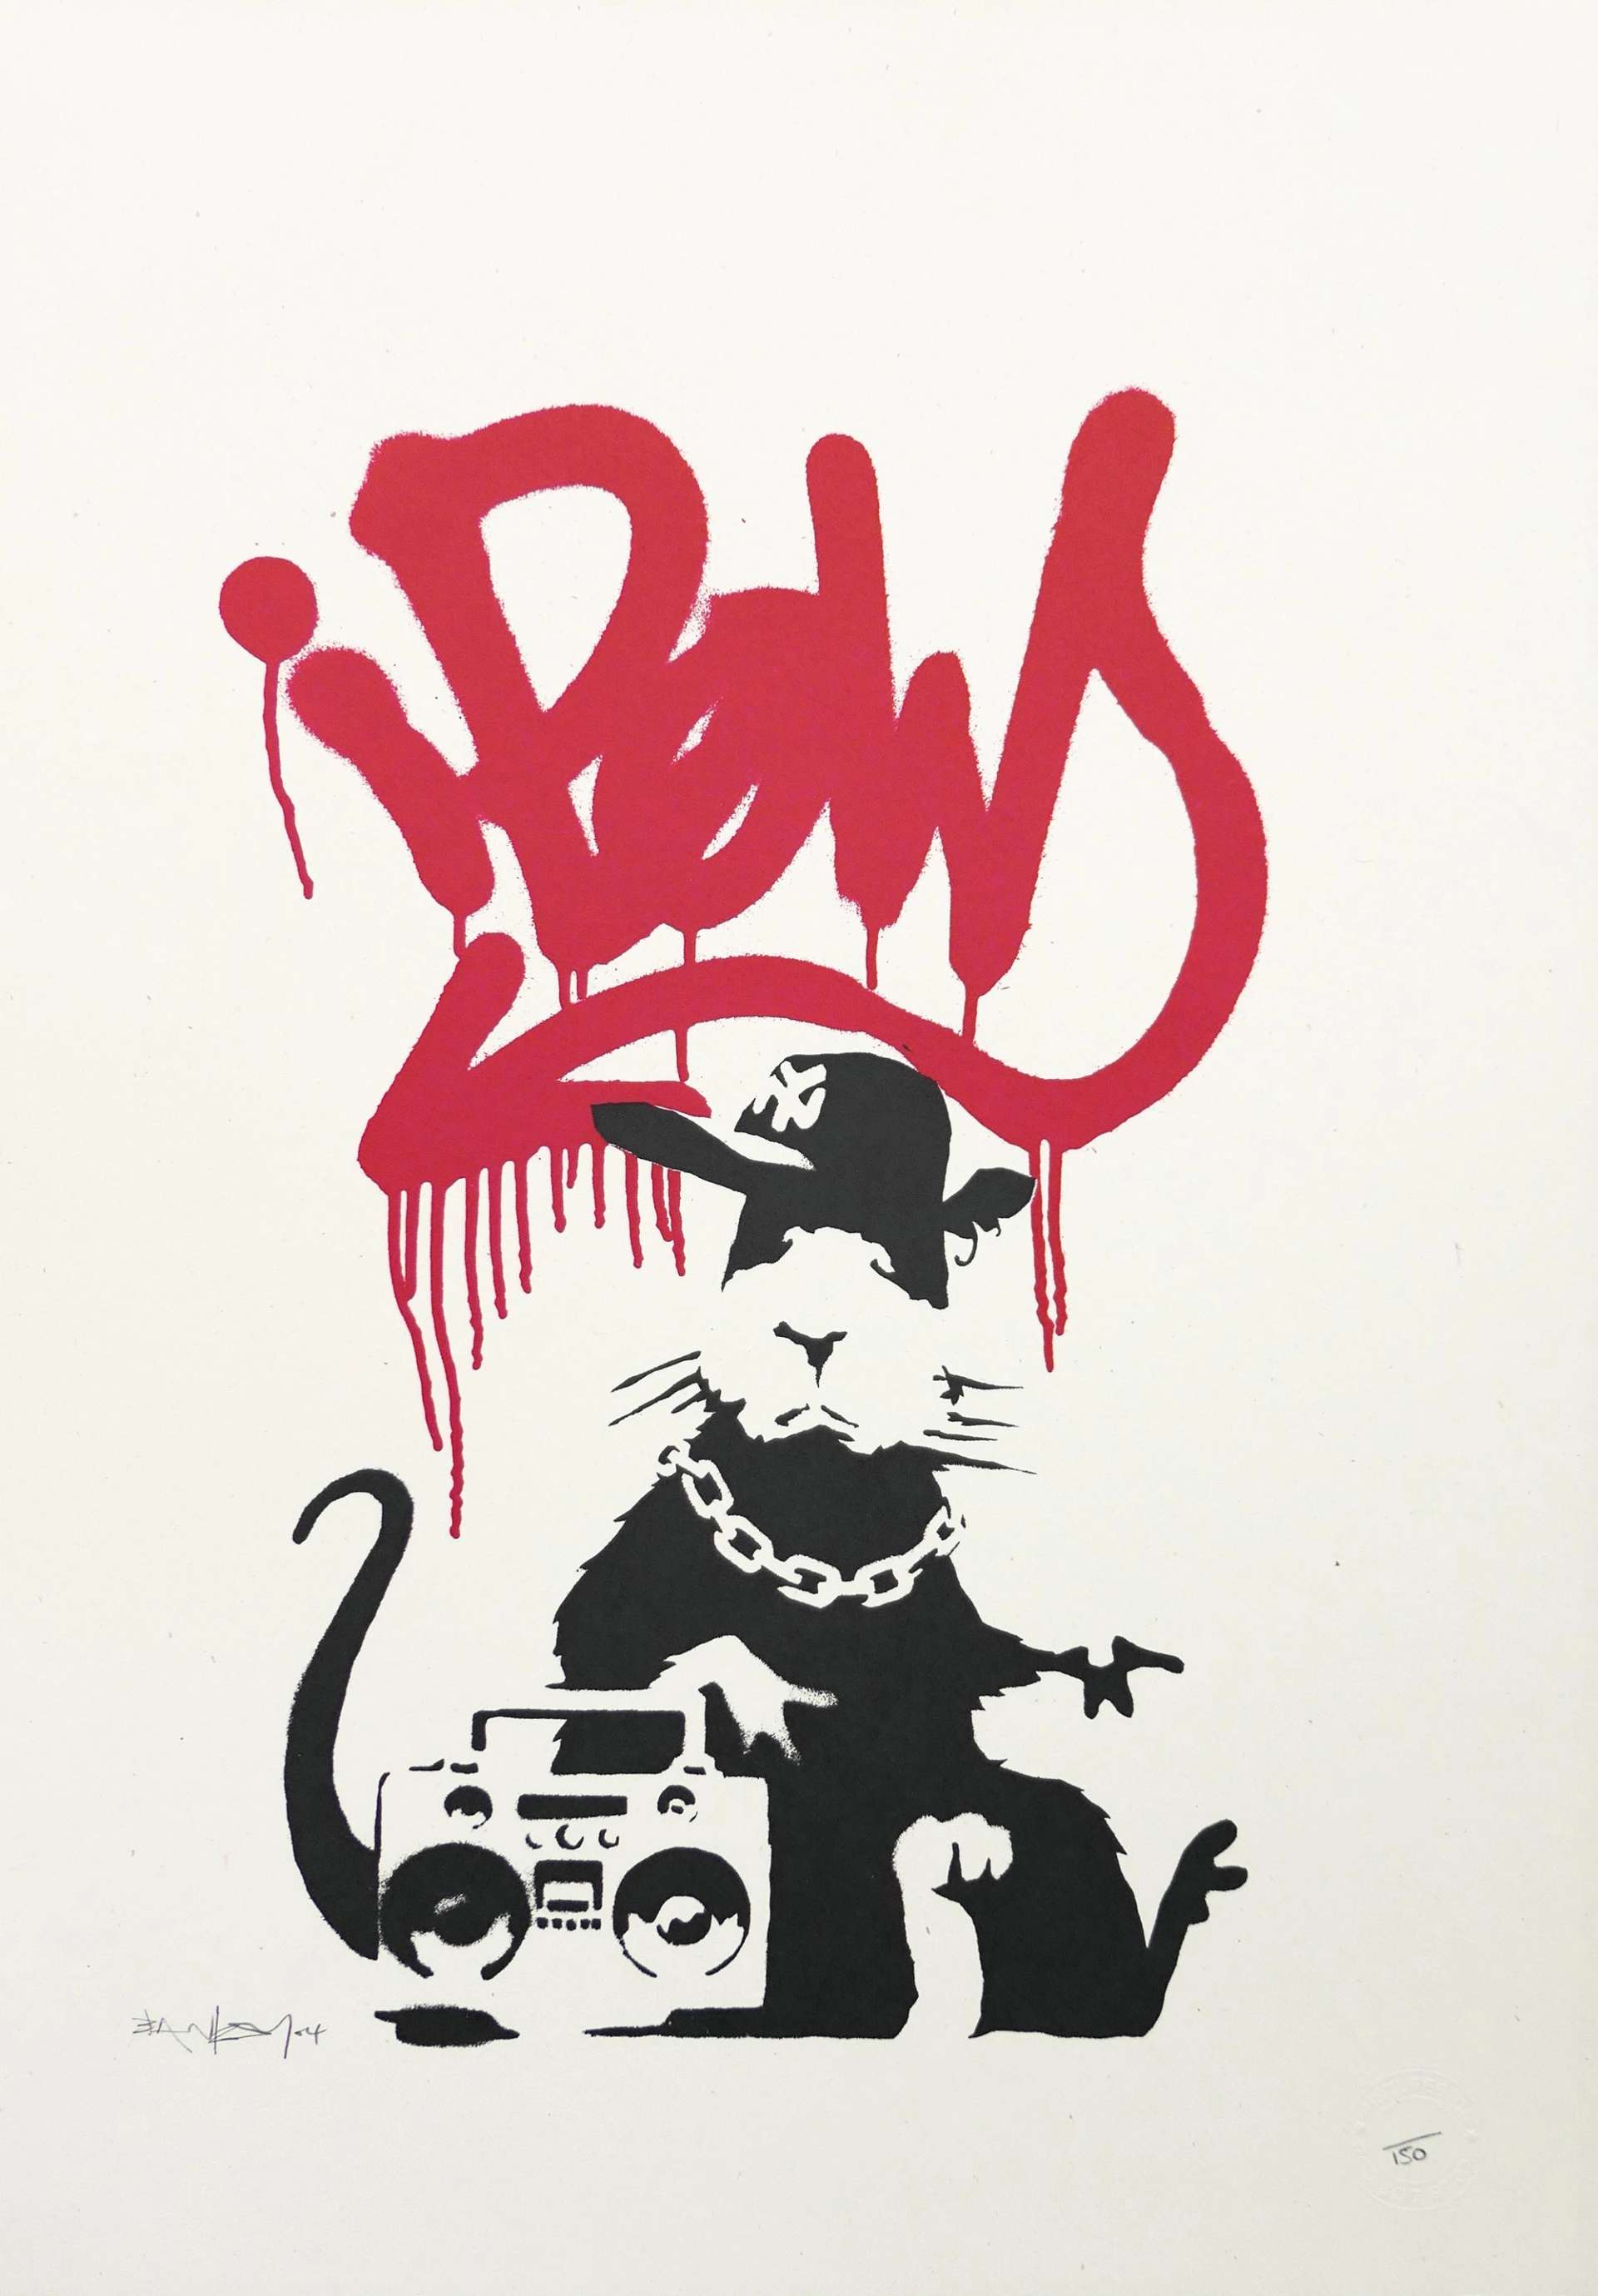 Gangsta Rat (Red) is largely monochrome print in Banksy’s spray-stencil style, portraying a rat sitting next to a boombox. The character is wearing accessories typical of “gangster” street wear, such as a New York Mets baseball cap, an ear piercing and a long chain with a medal. There is a red tag behind the rat saying “IPOW” as the central splash of colour on the image.